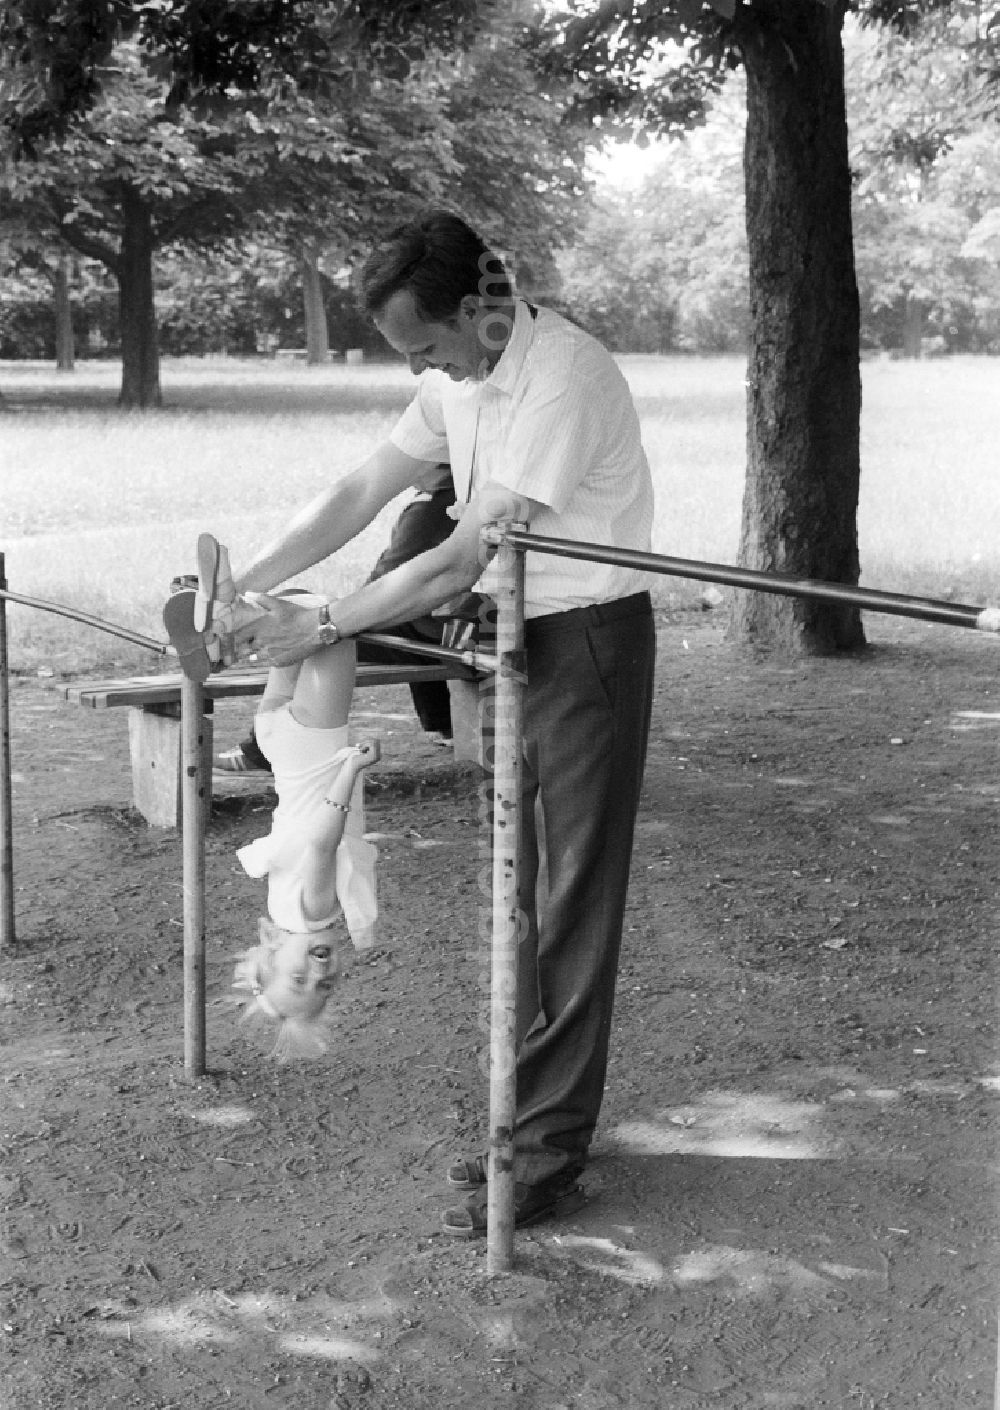 GDR photo archive: Halle (Saale) - Father with child on a playground in Halle (Saale) in the federal state of Saxony-Anhalt on the territory of the former GDR, German Democratic Republic